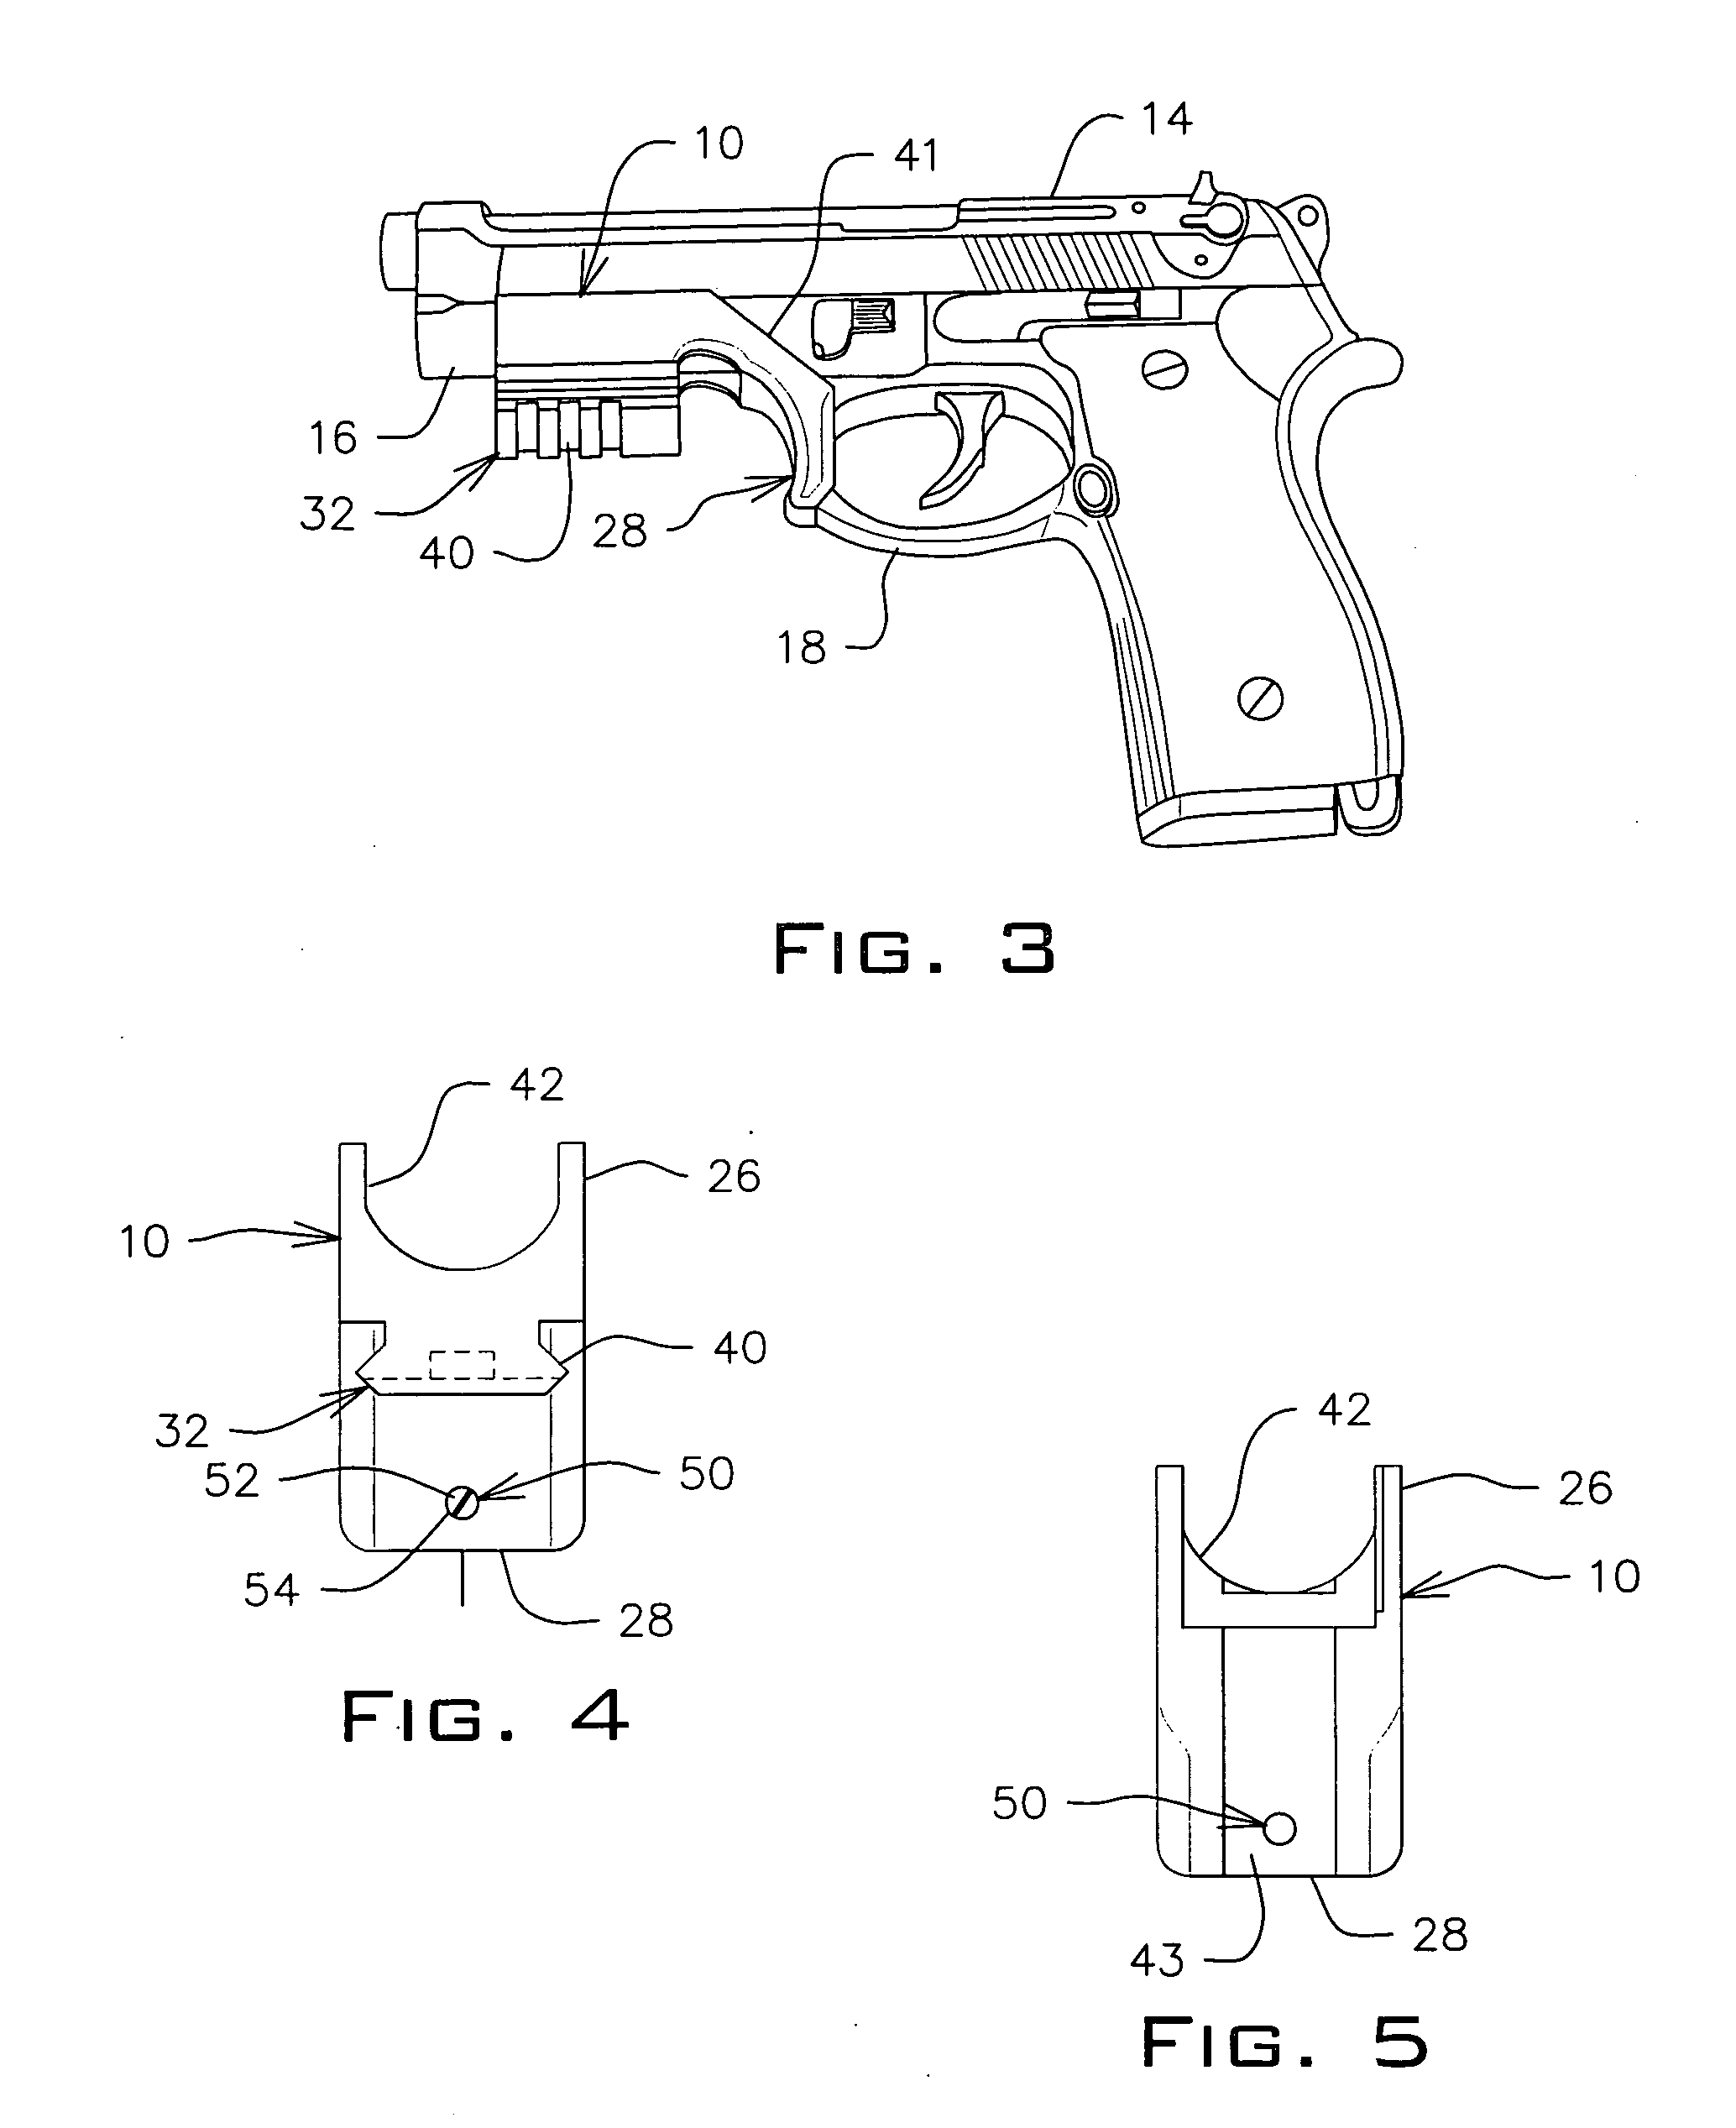 Mounting assembly and methods of using same